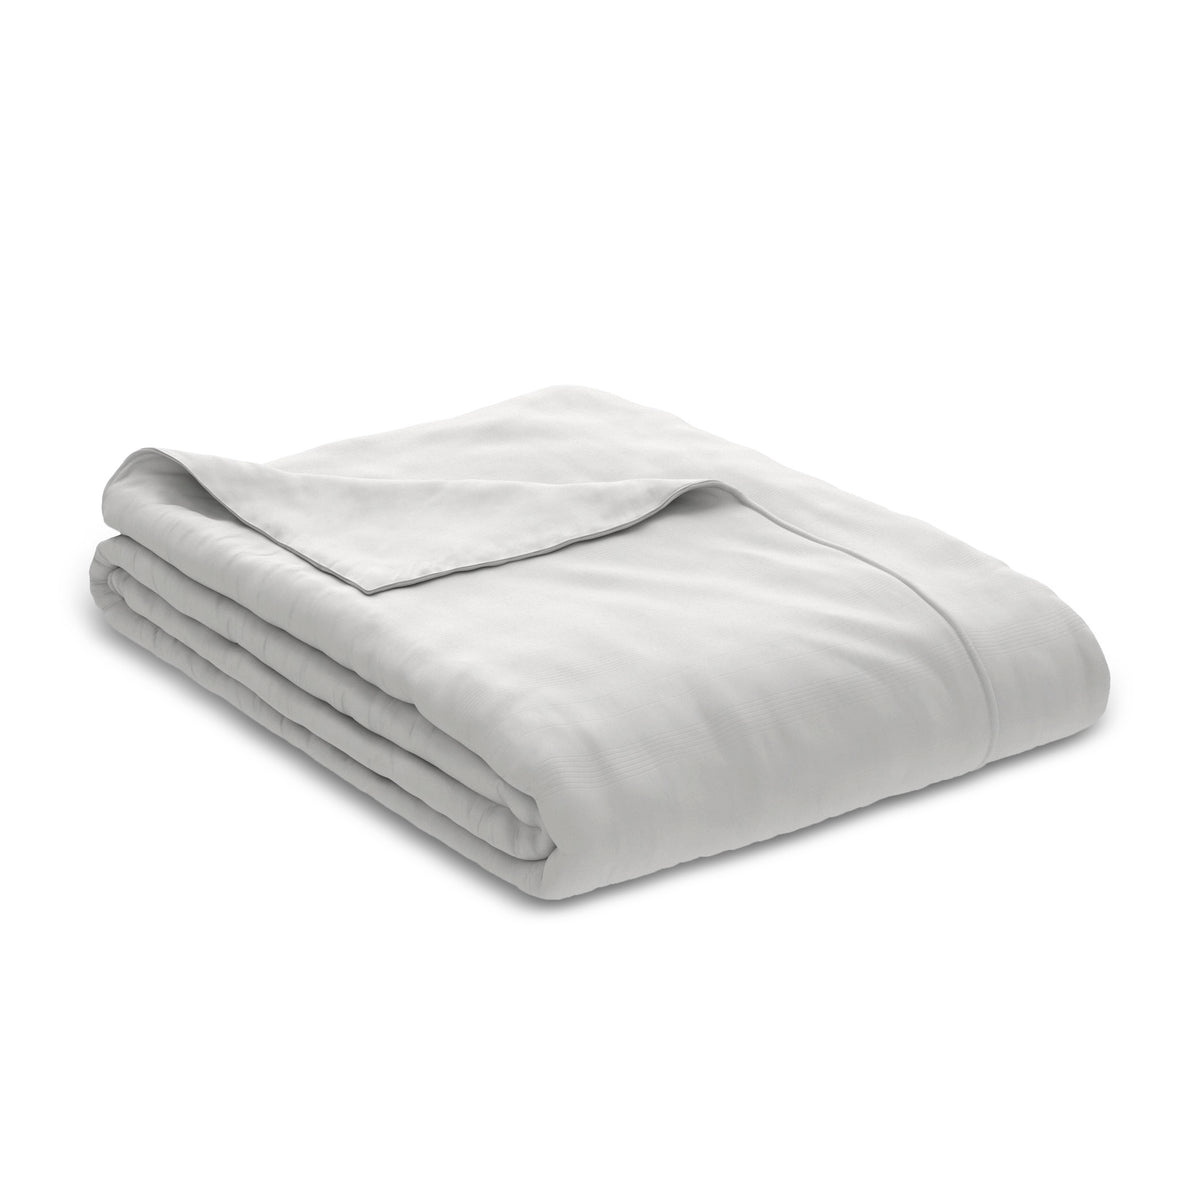 Image of a neatly folded White Soft Touch Duvet Cover with the back left corner folded over on a white background